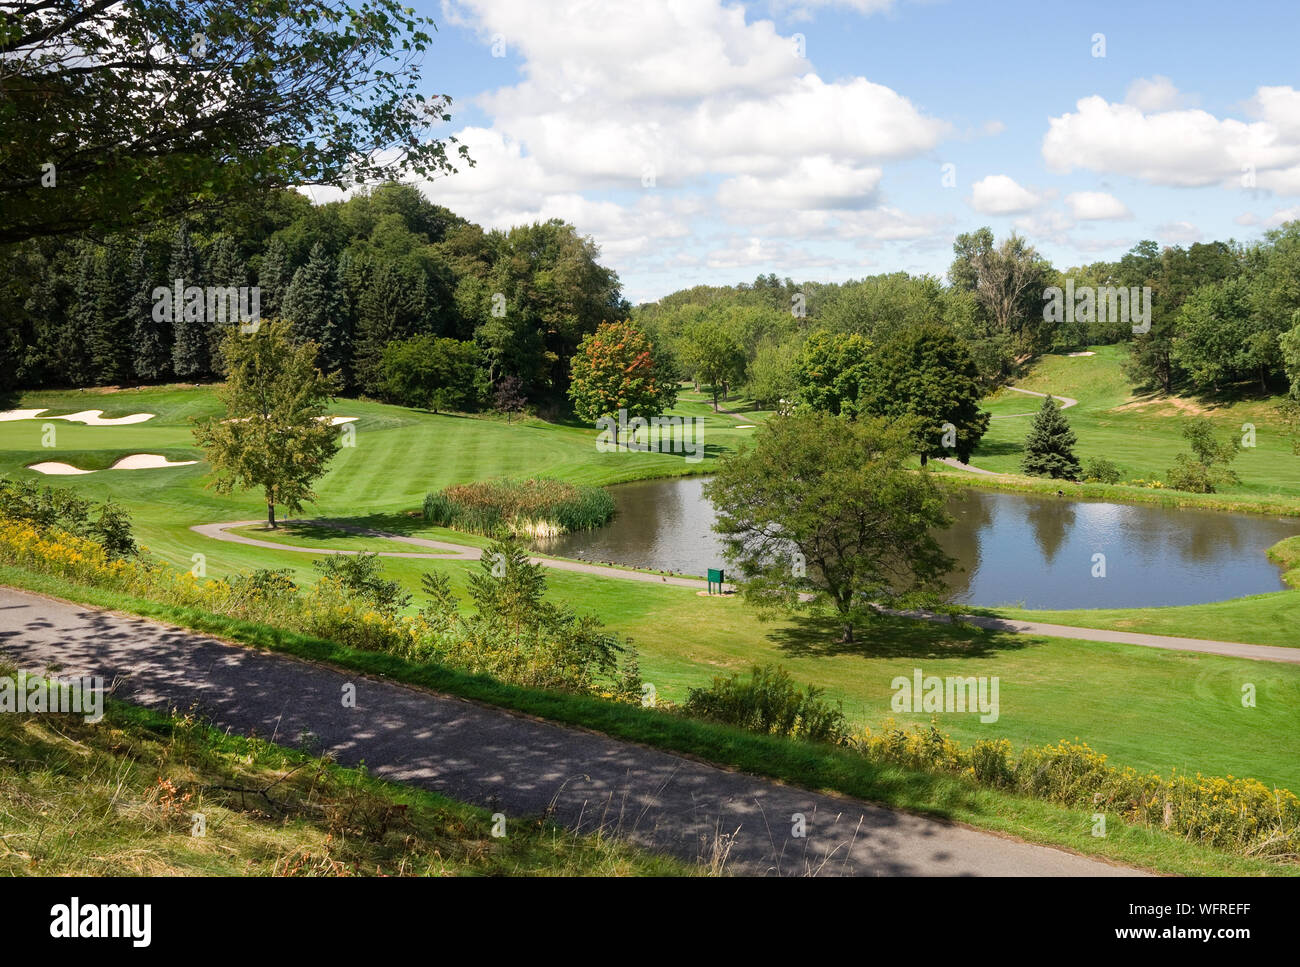 Golf Course in upstate New York Stock Photo